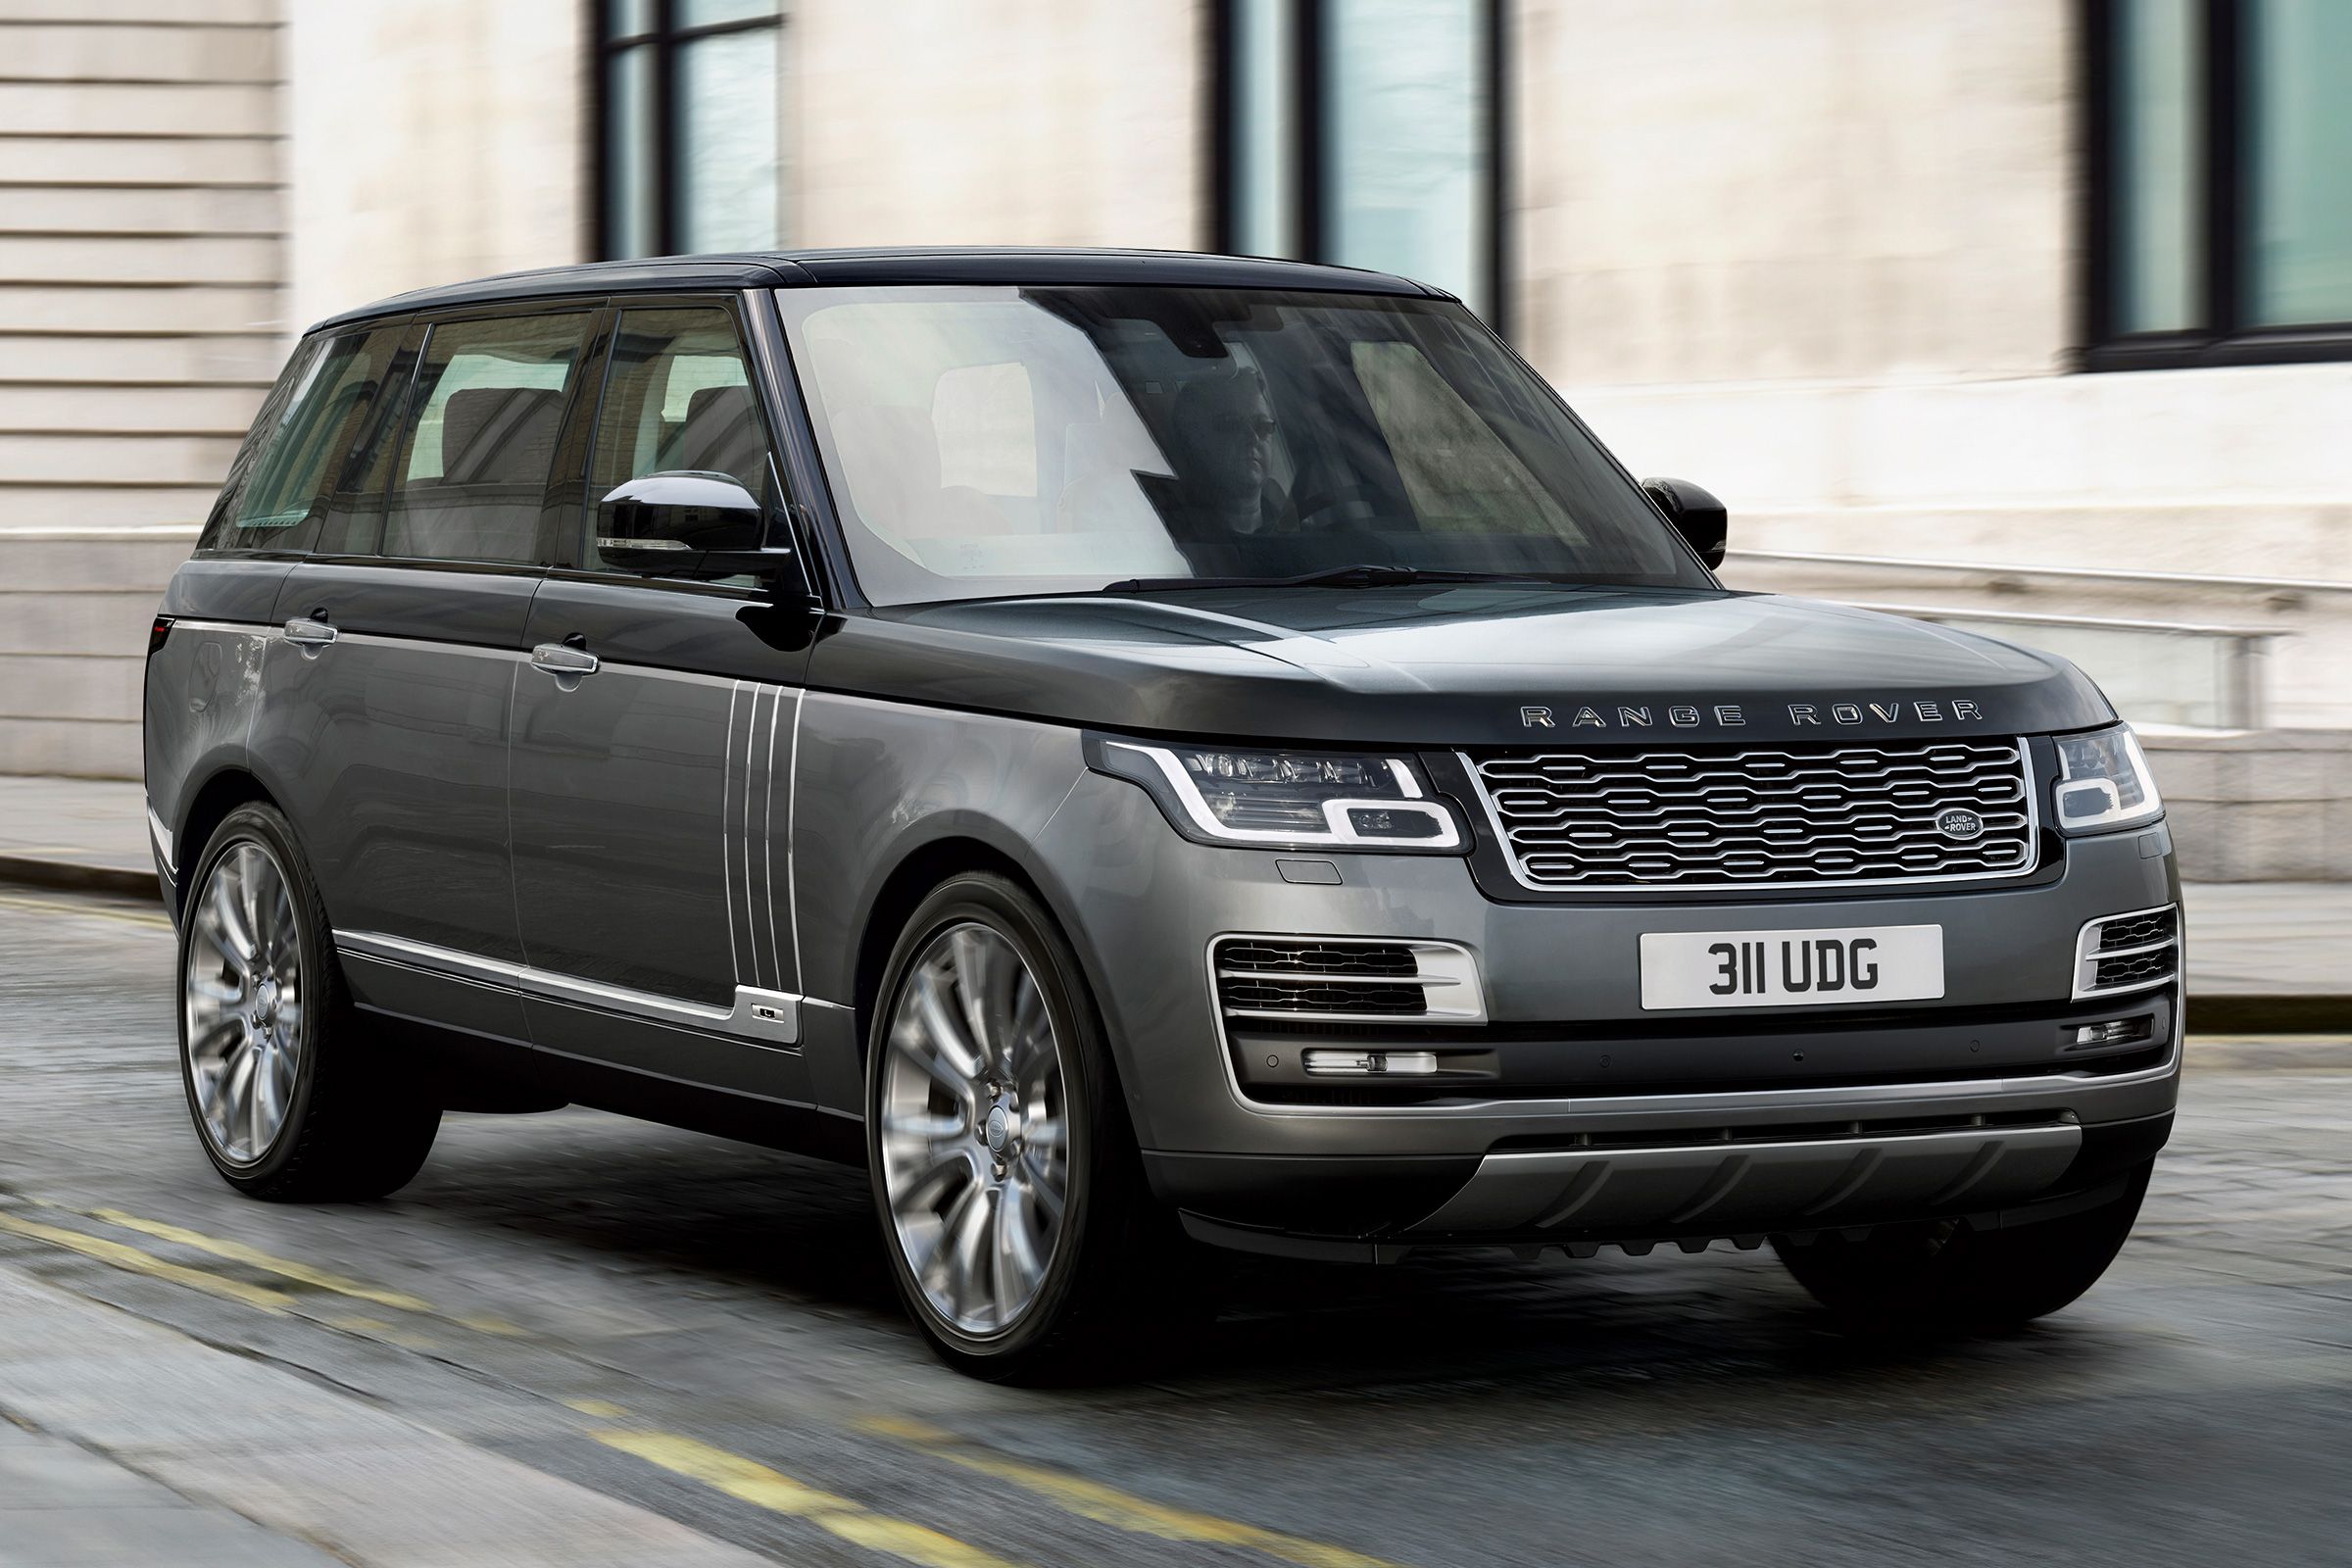 Land Rover Range Rover SV Autobiography LWB on the road